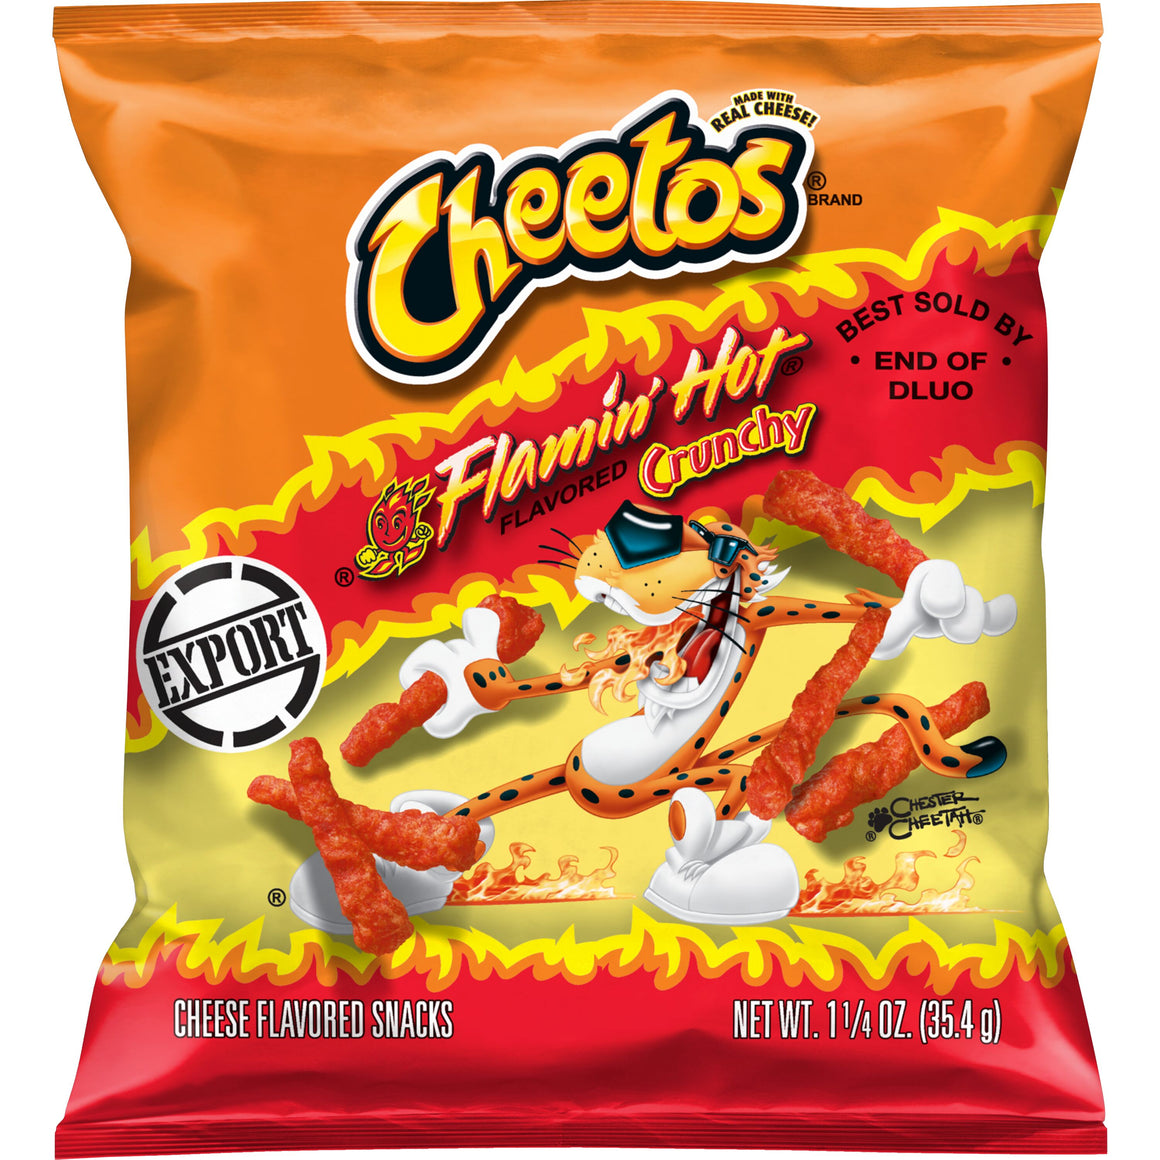 Cheetos Crunchy Flaming Hot Cheese Flavored Snack, Made with Real Cheese, 1.25 OZ (35g) - Export